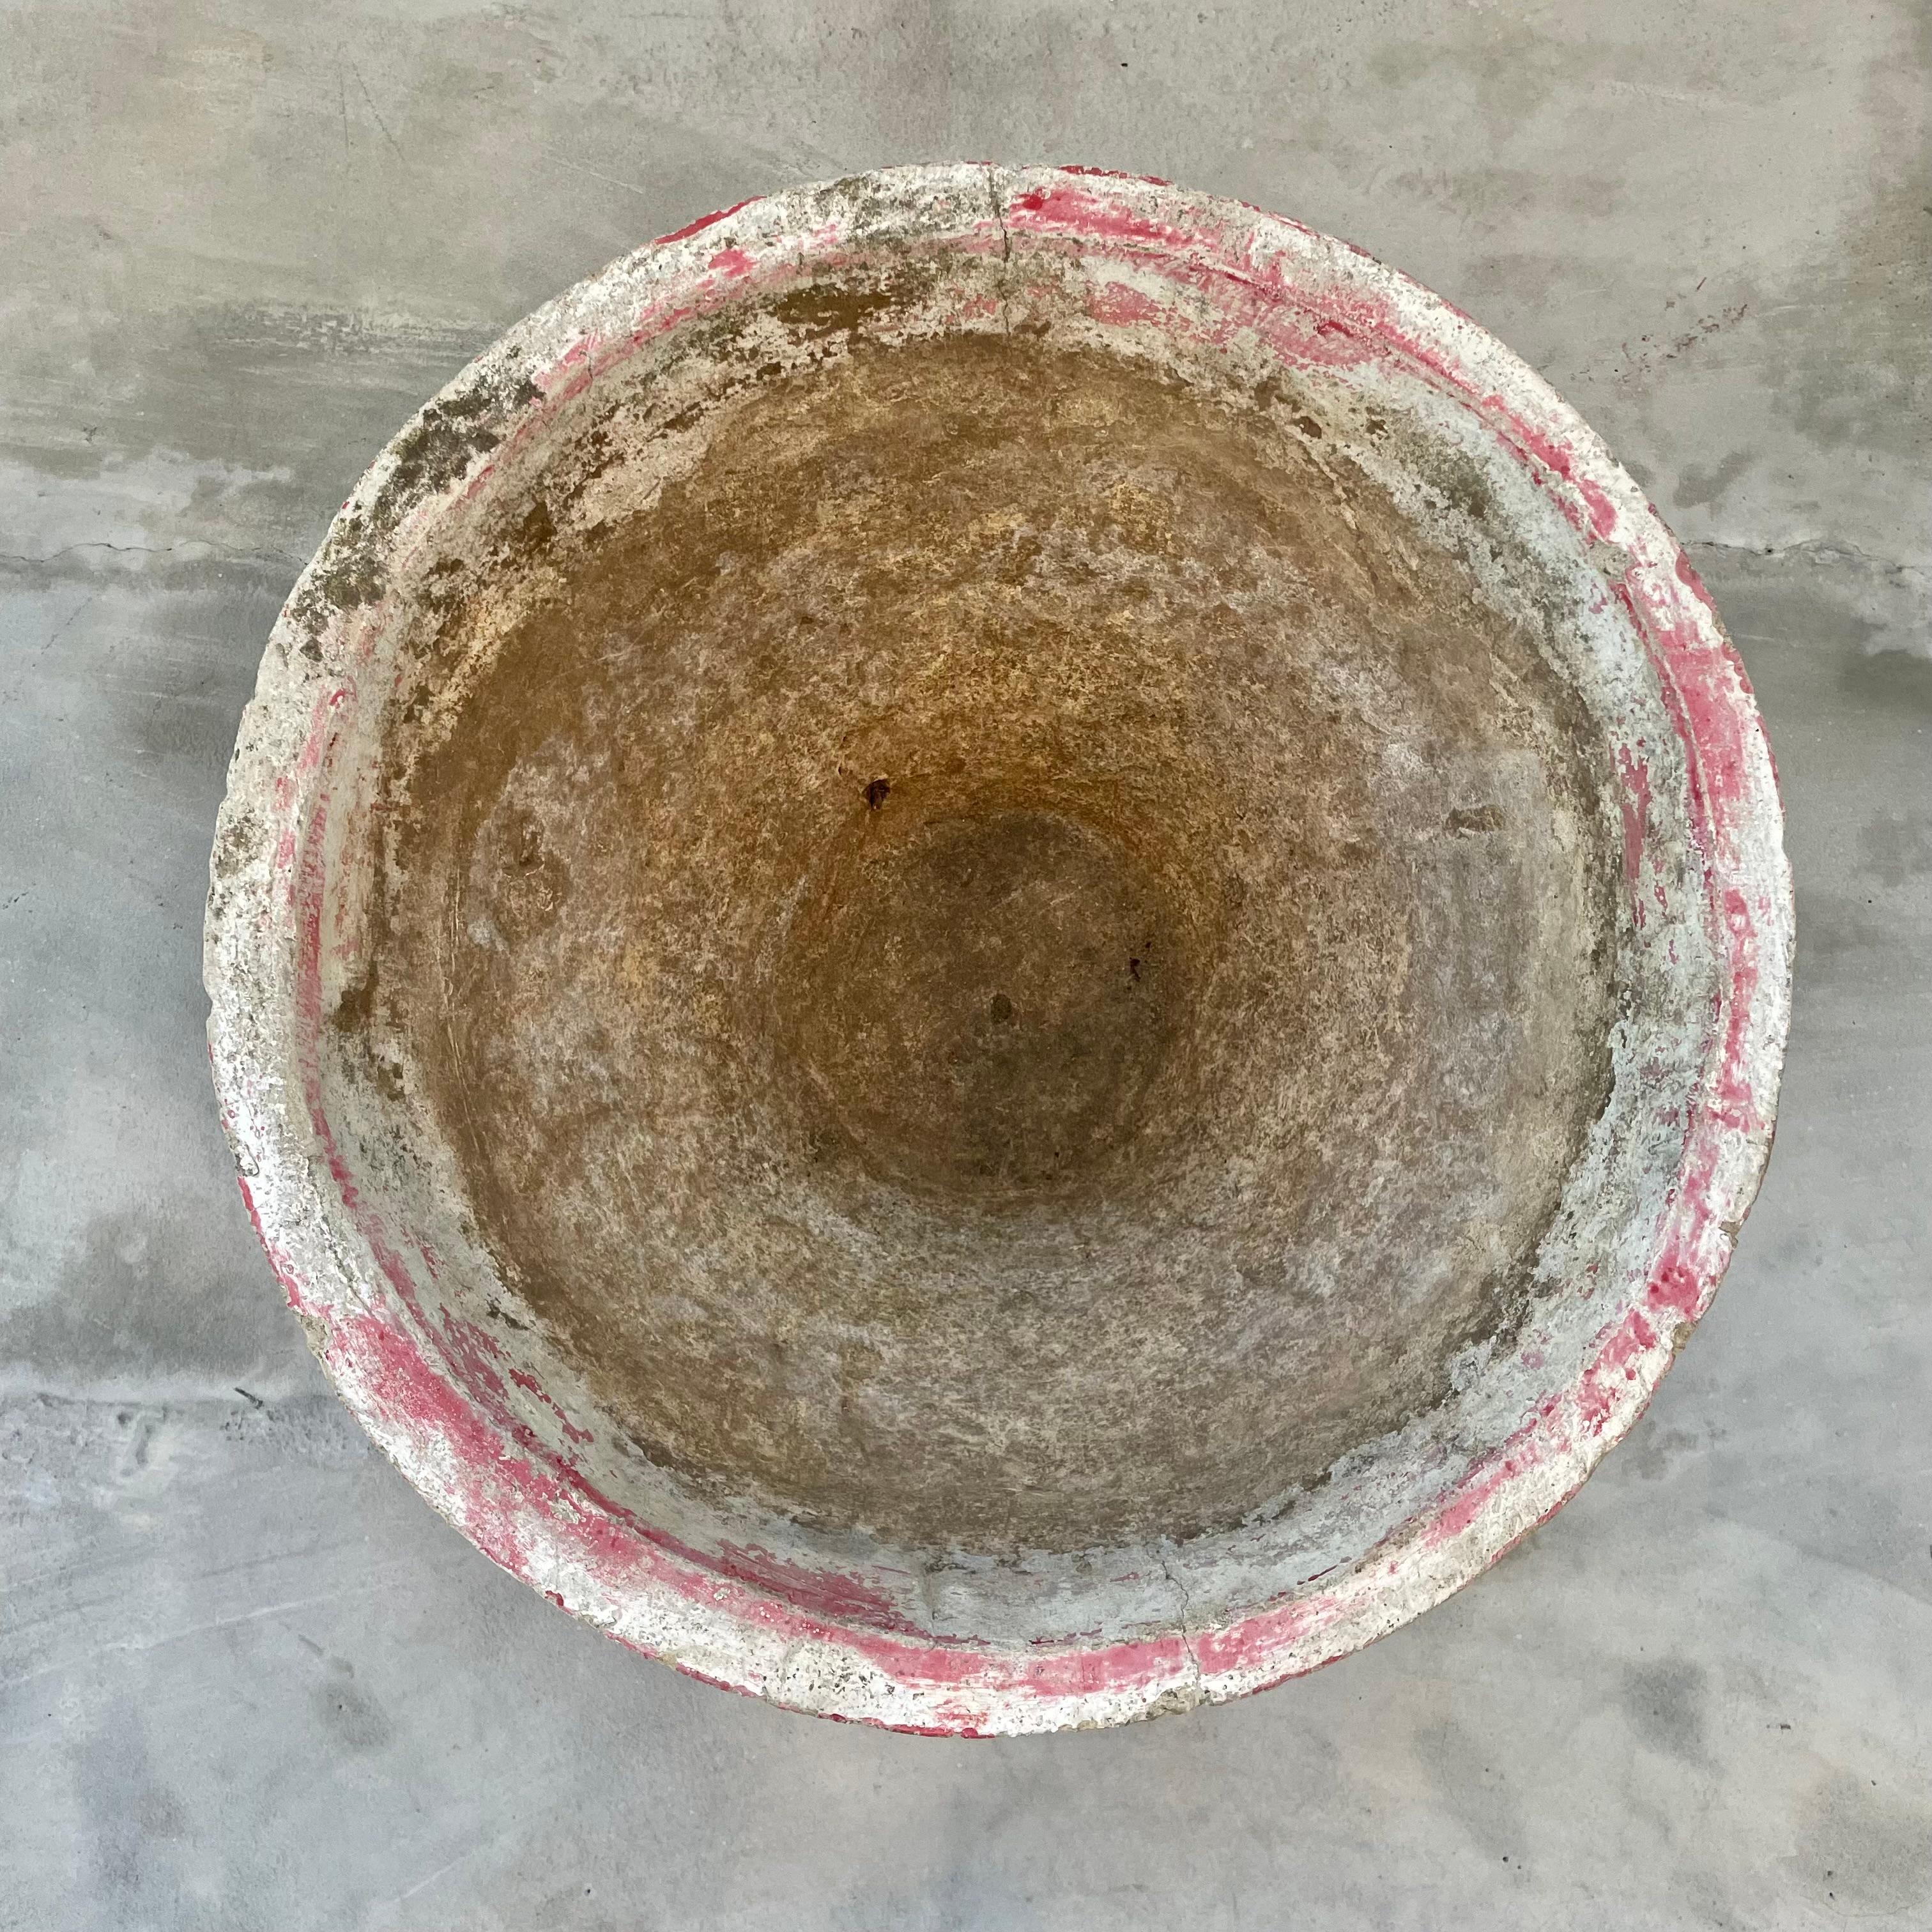 Concrete cone flower pot by Swiss architect and industrial designer Willy Guhl. Made in the 1960s in Switzerland. Beautifully faded dusty red patina across the whole outer body of the planter. Factory drilled drainage hole in the base.